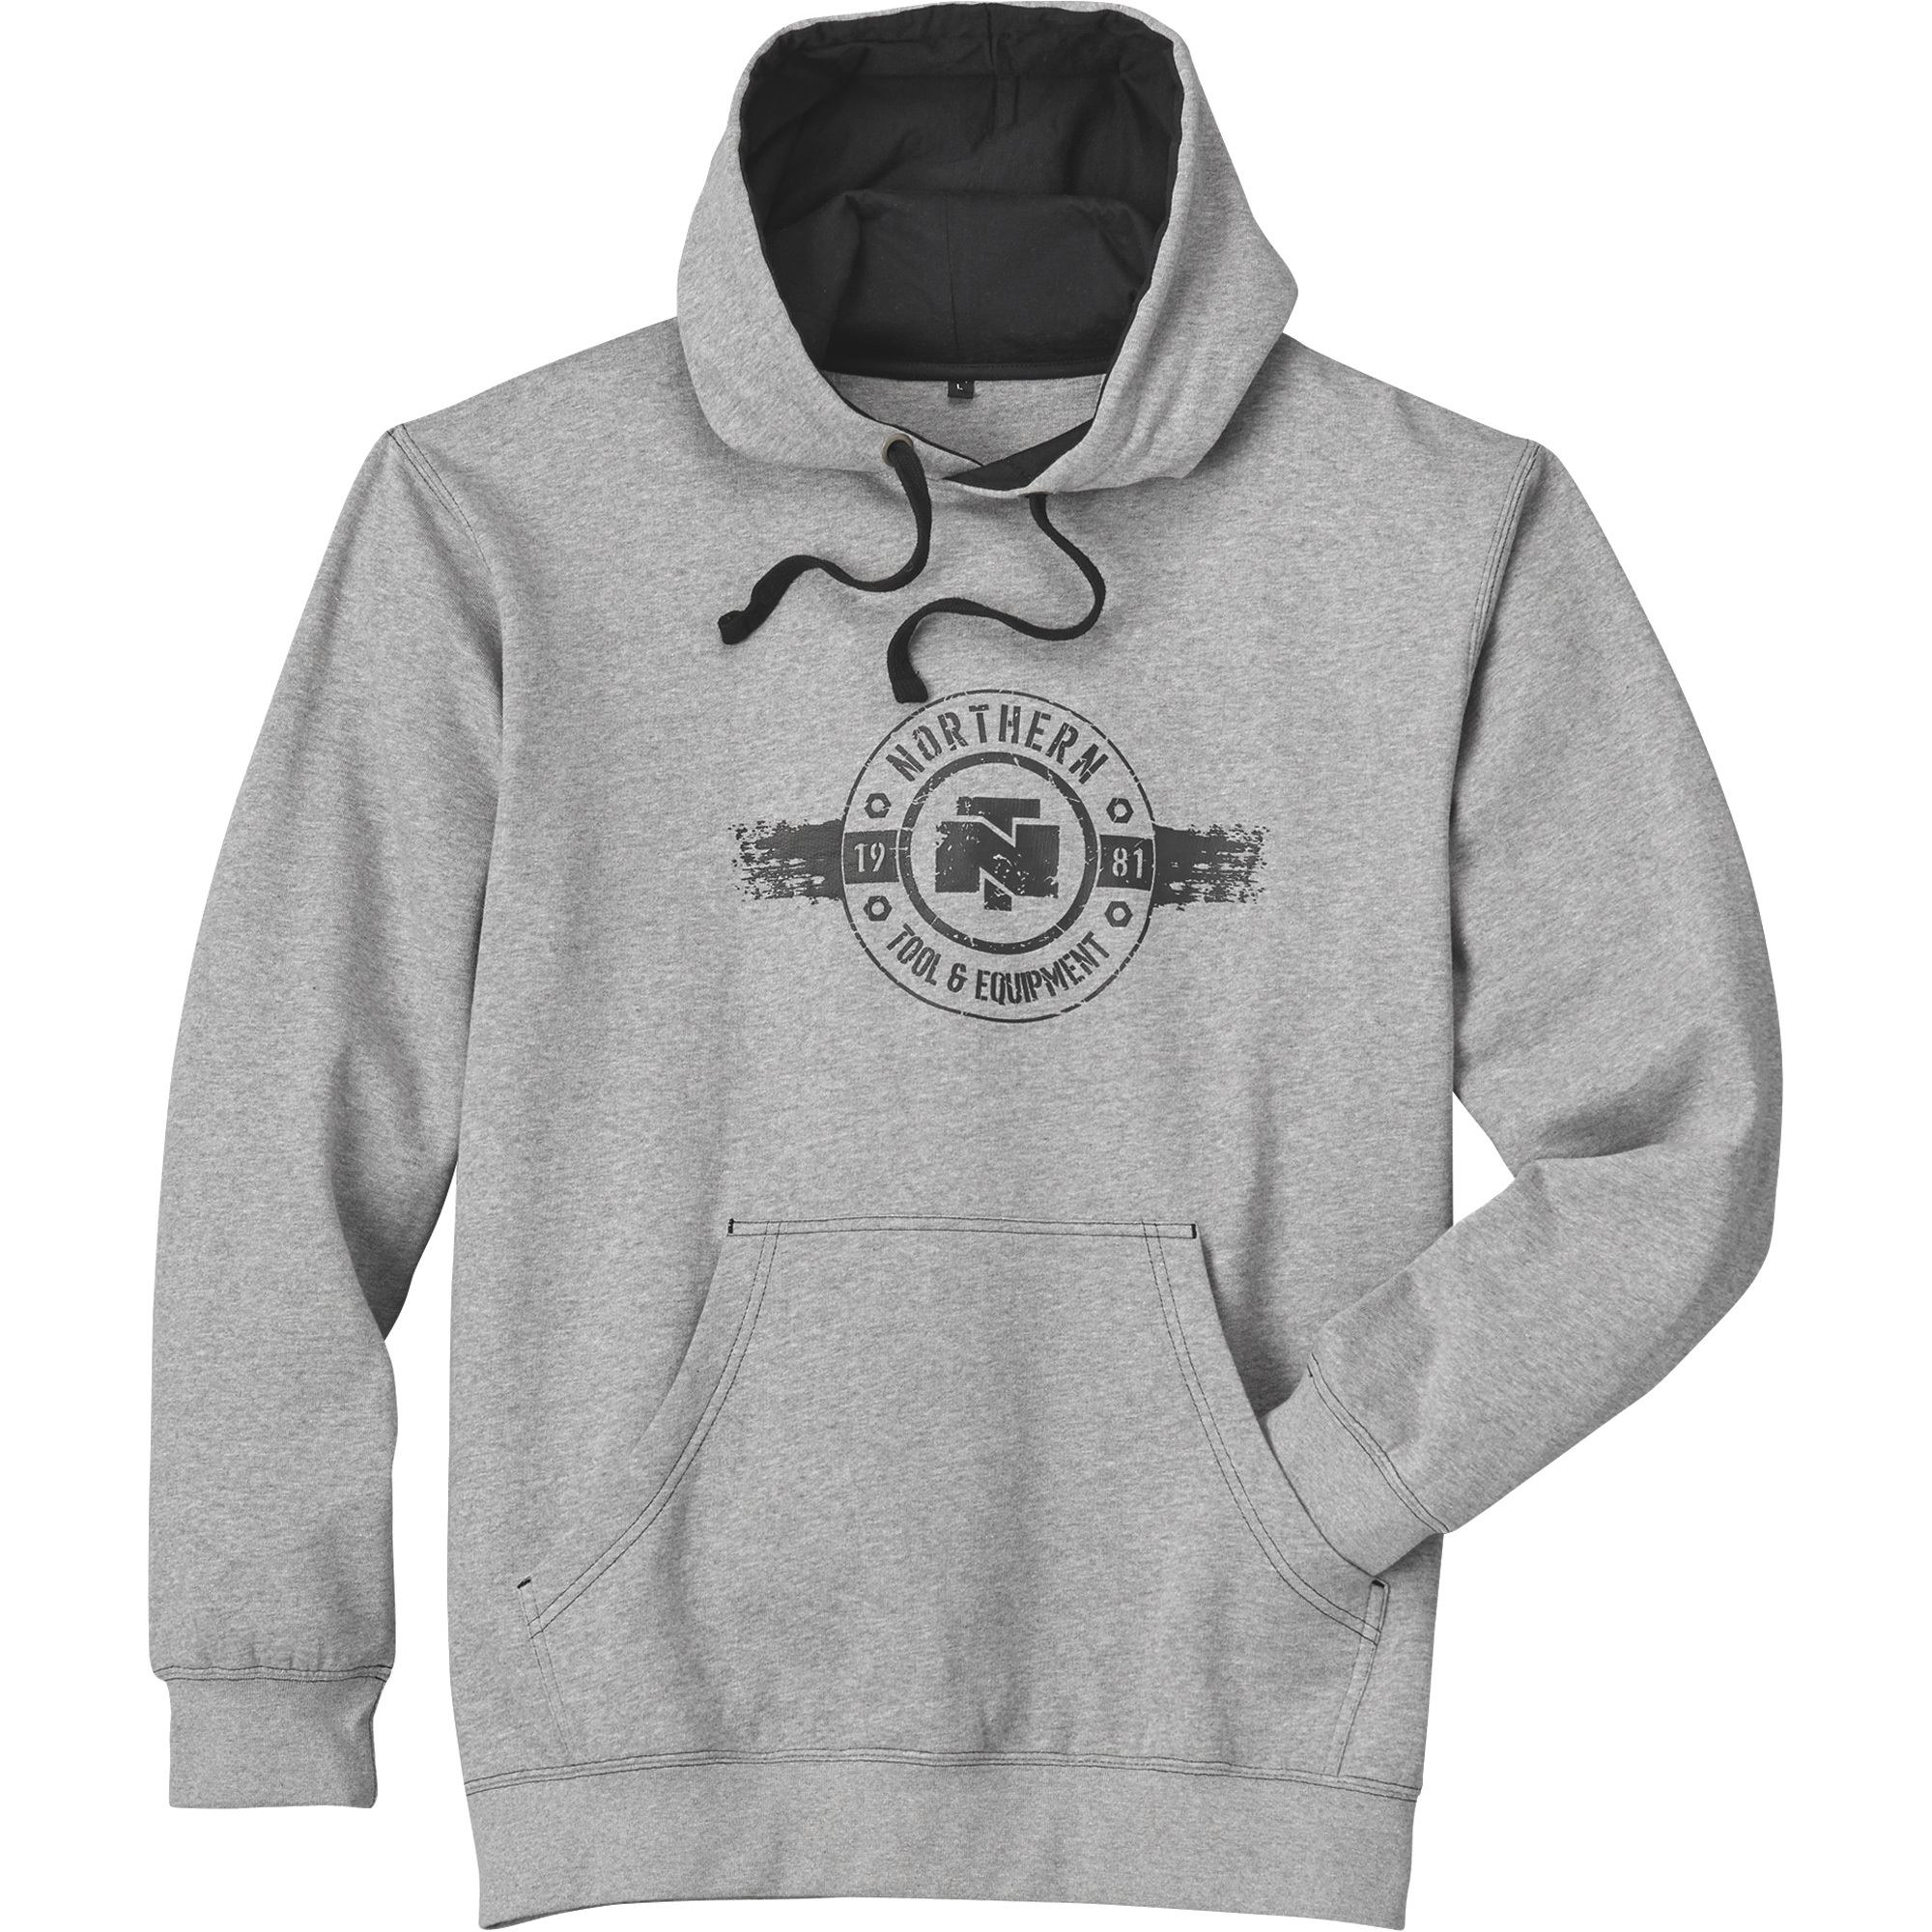 Gravel Gear Men's Pullover Hoodie with NTE Graphics â Gray, Medium